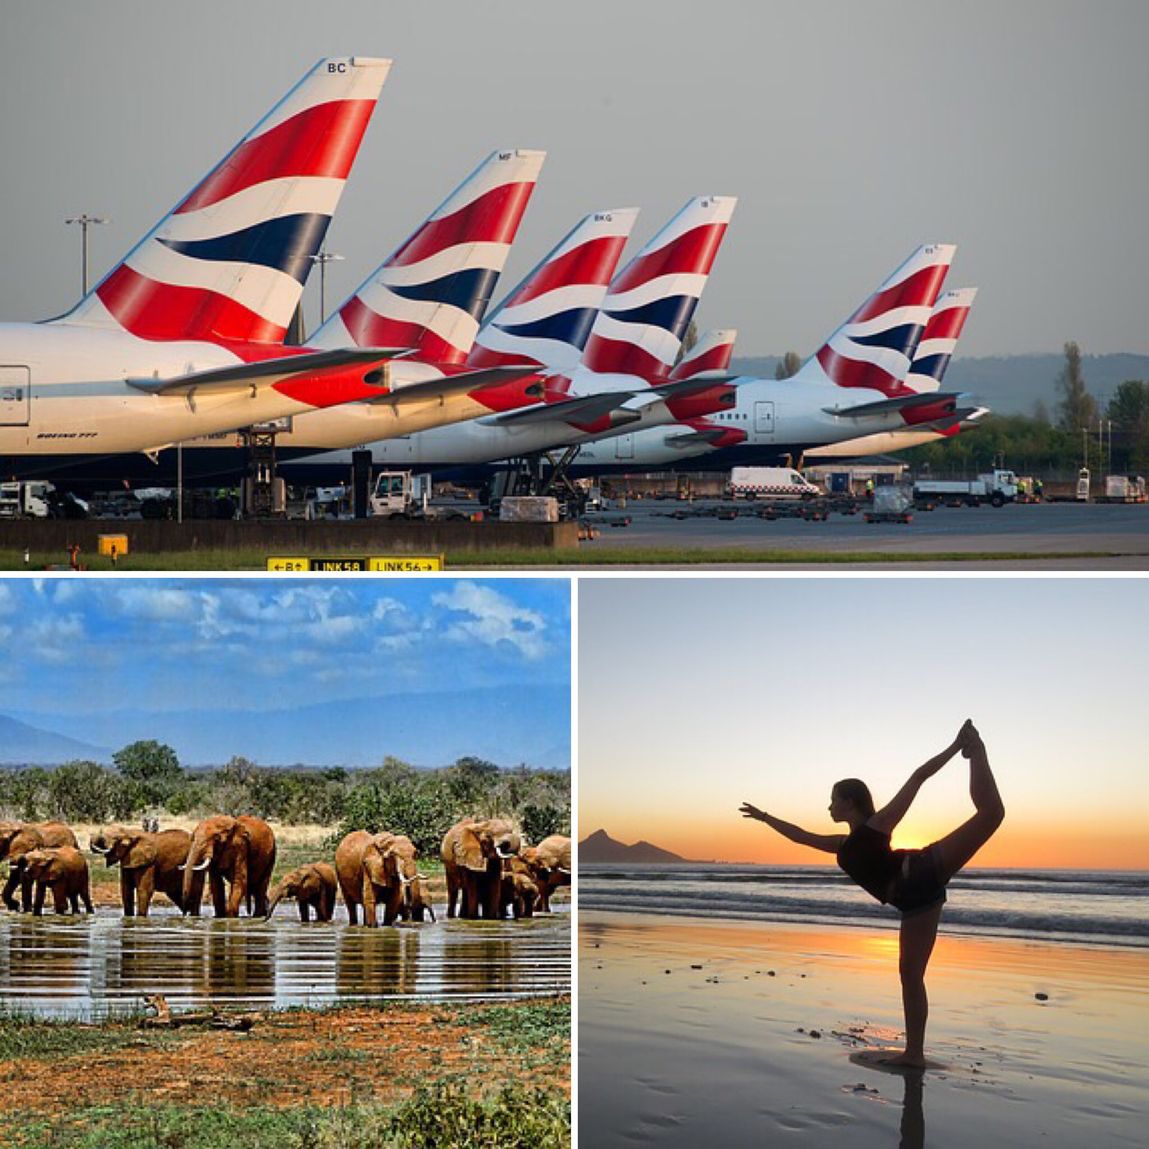 BA club world deal to south africa for £1150 